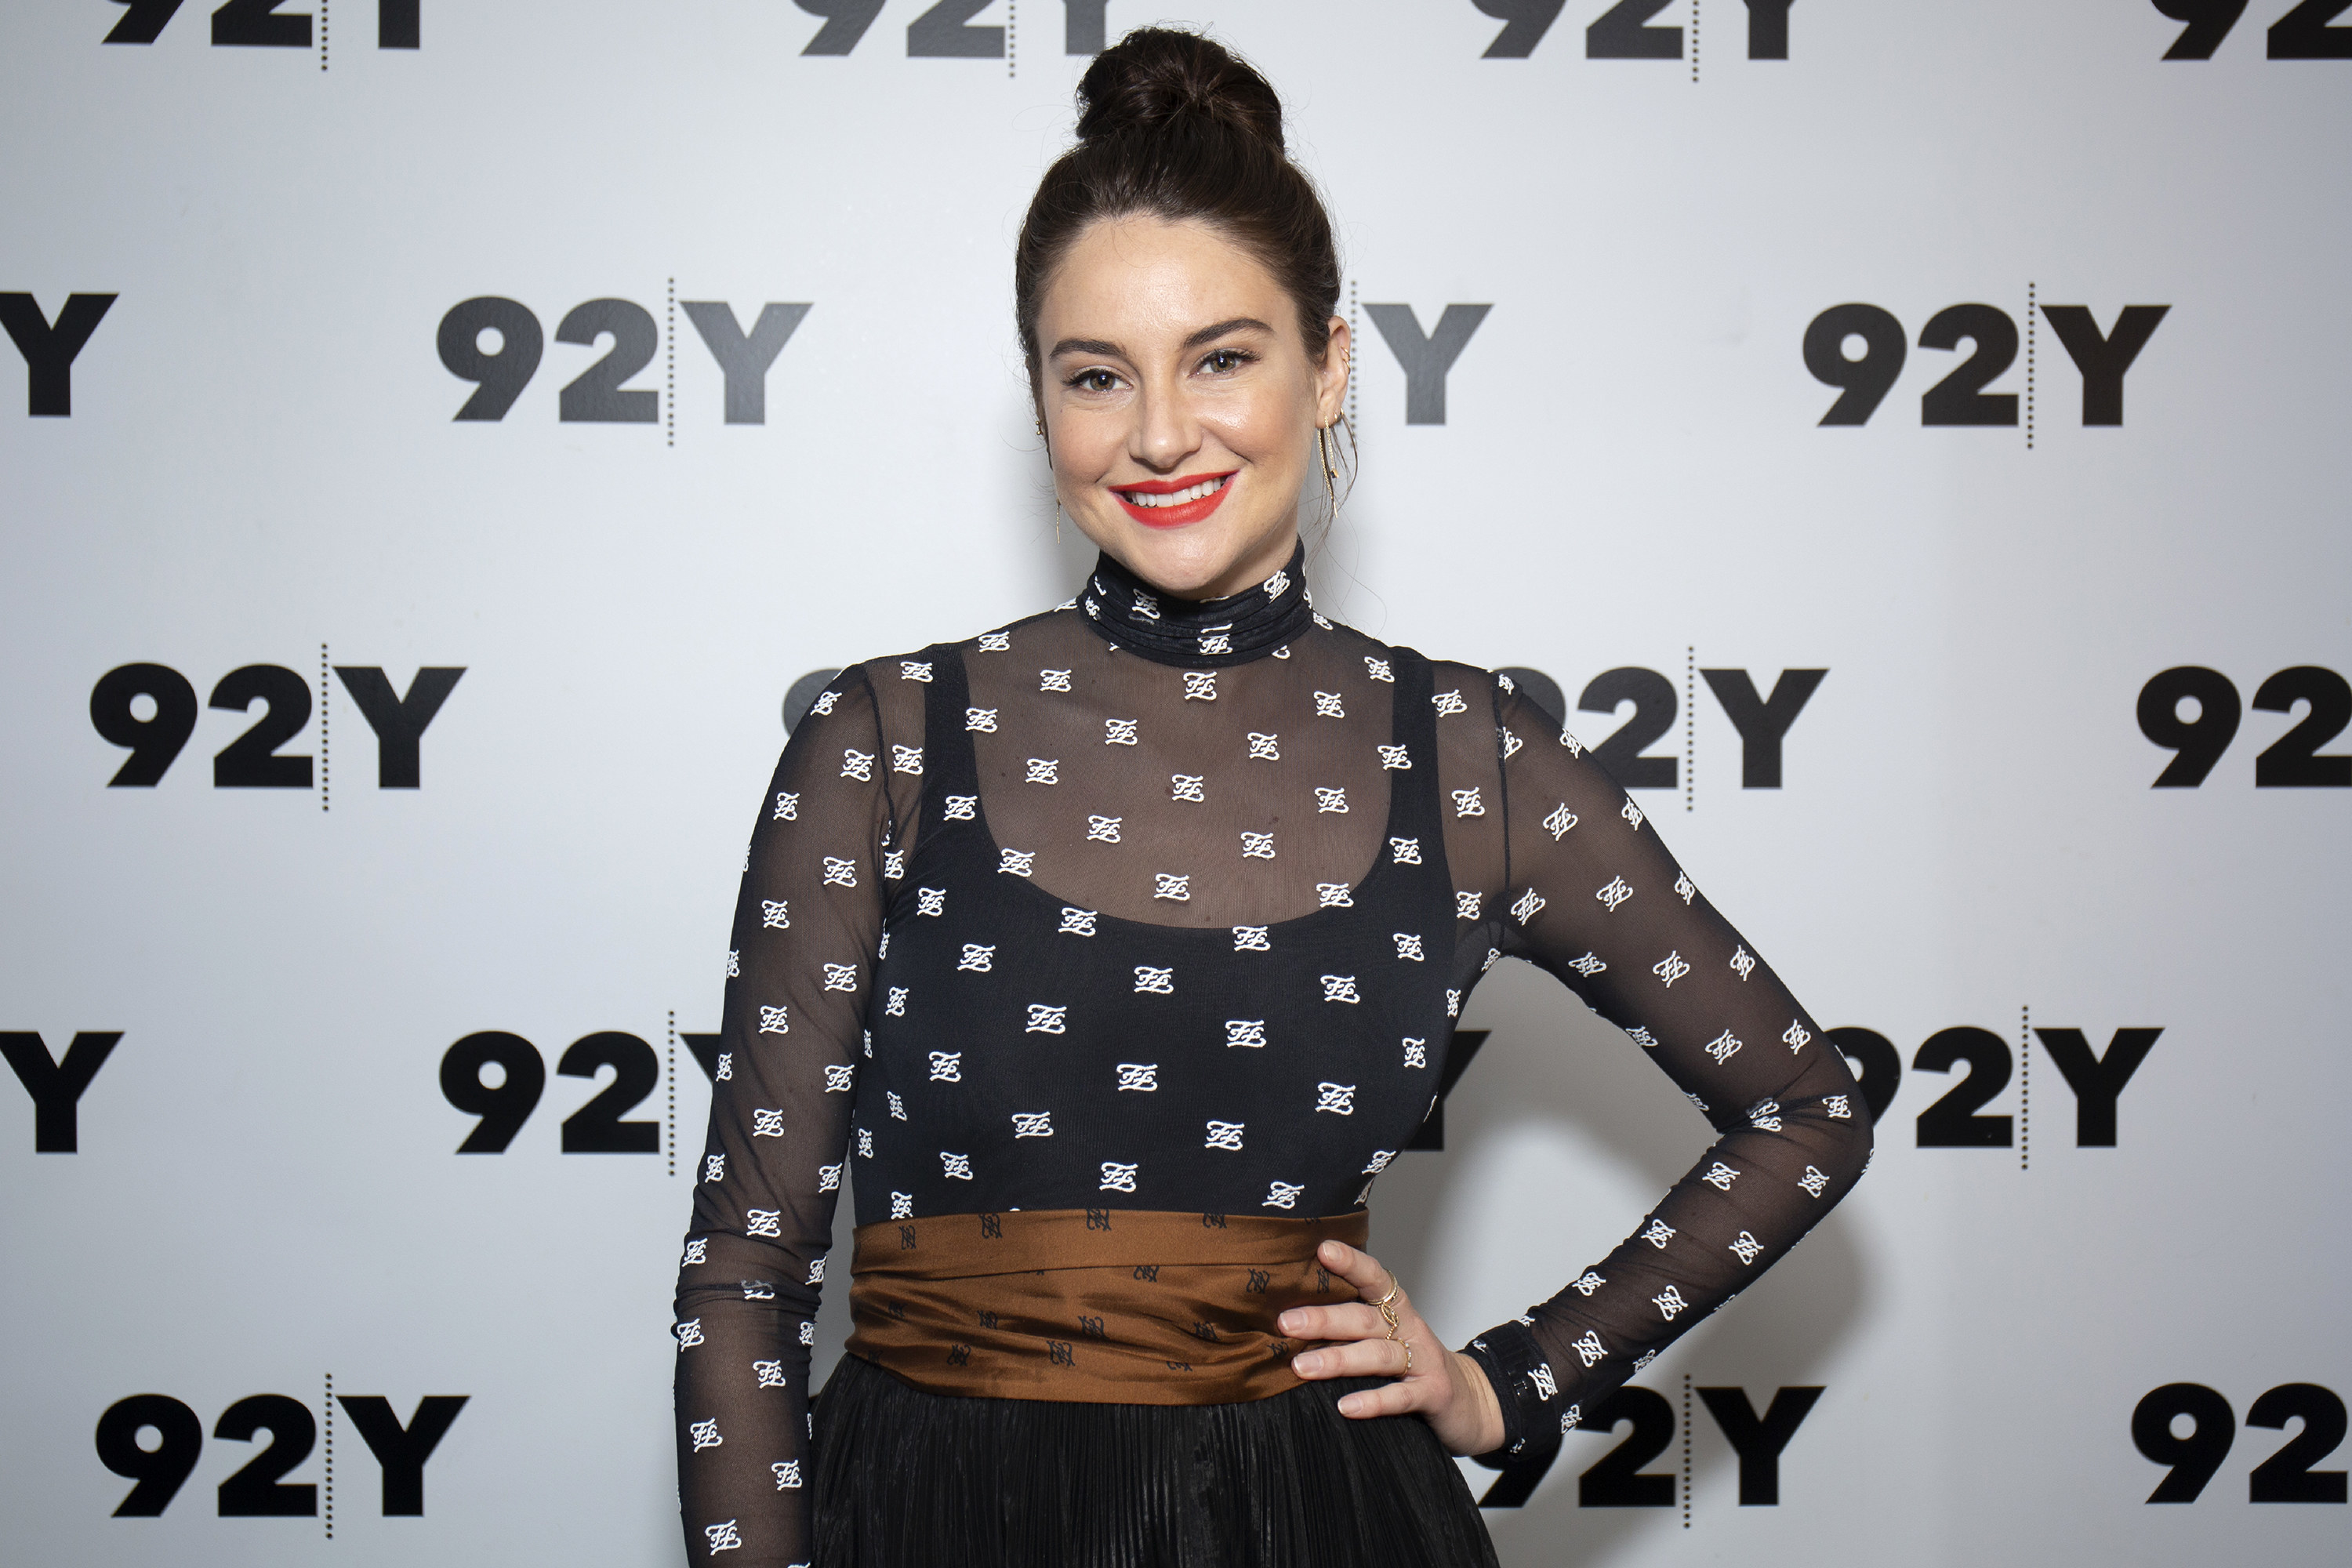 Shailene Woodley stands with her hand on her hip at an event